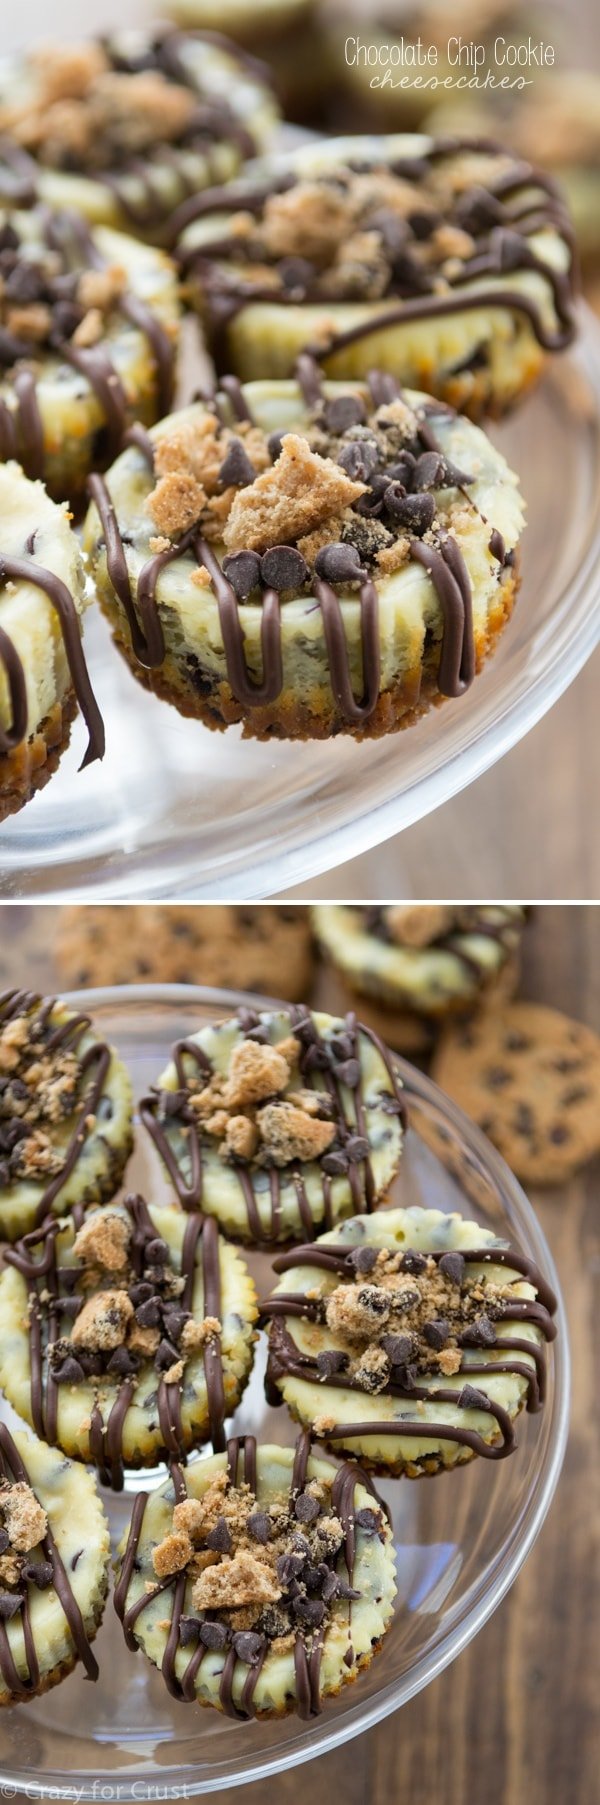 Chocolate Chip Cookie Cheesecakes with a chocolate chip cookie crust!